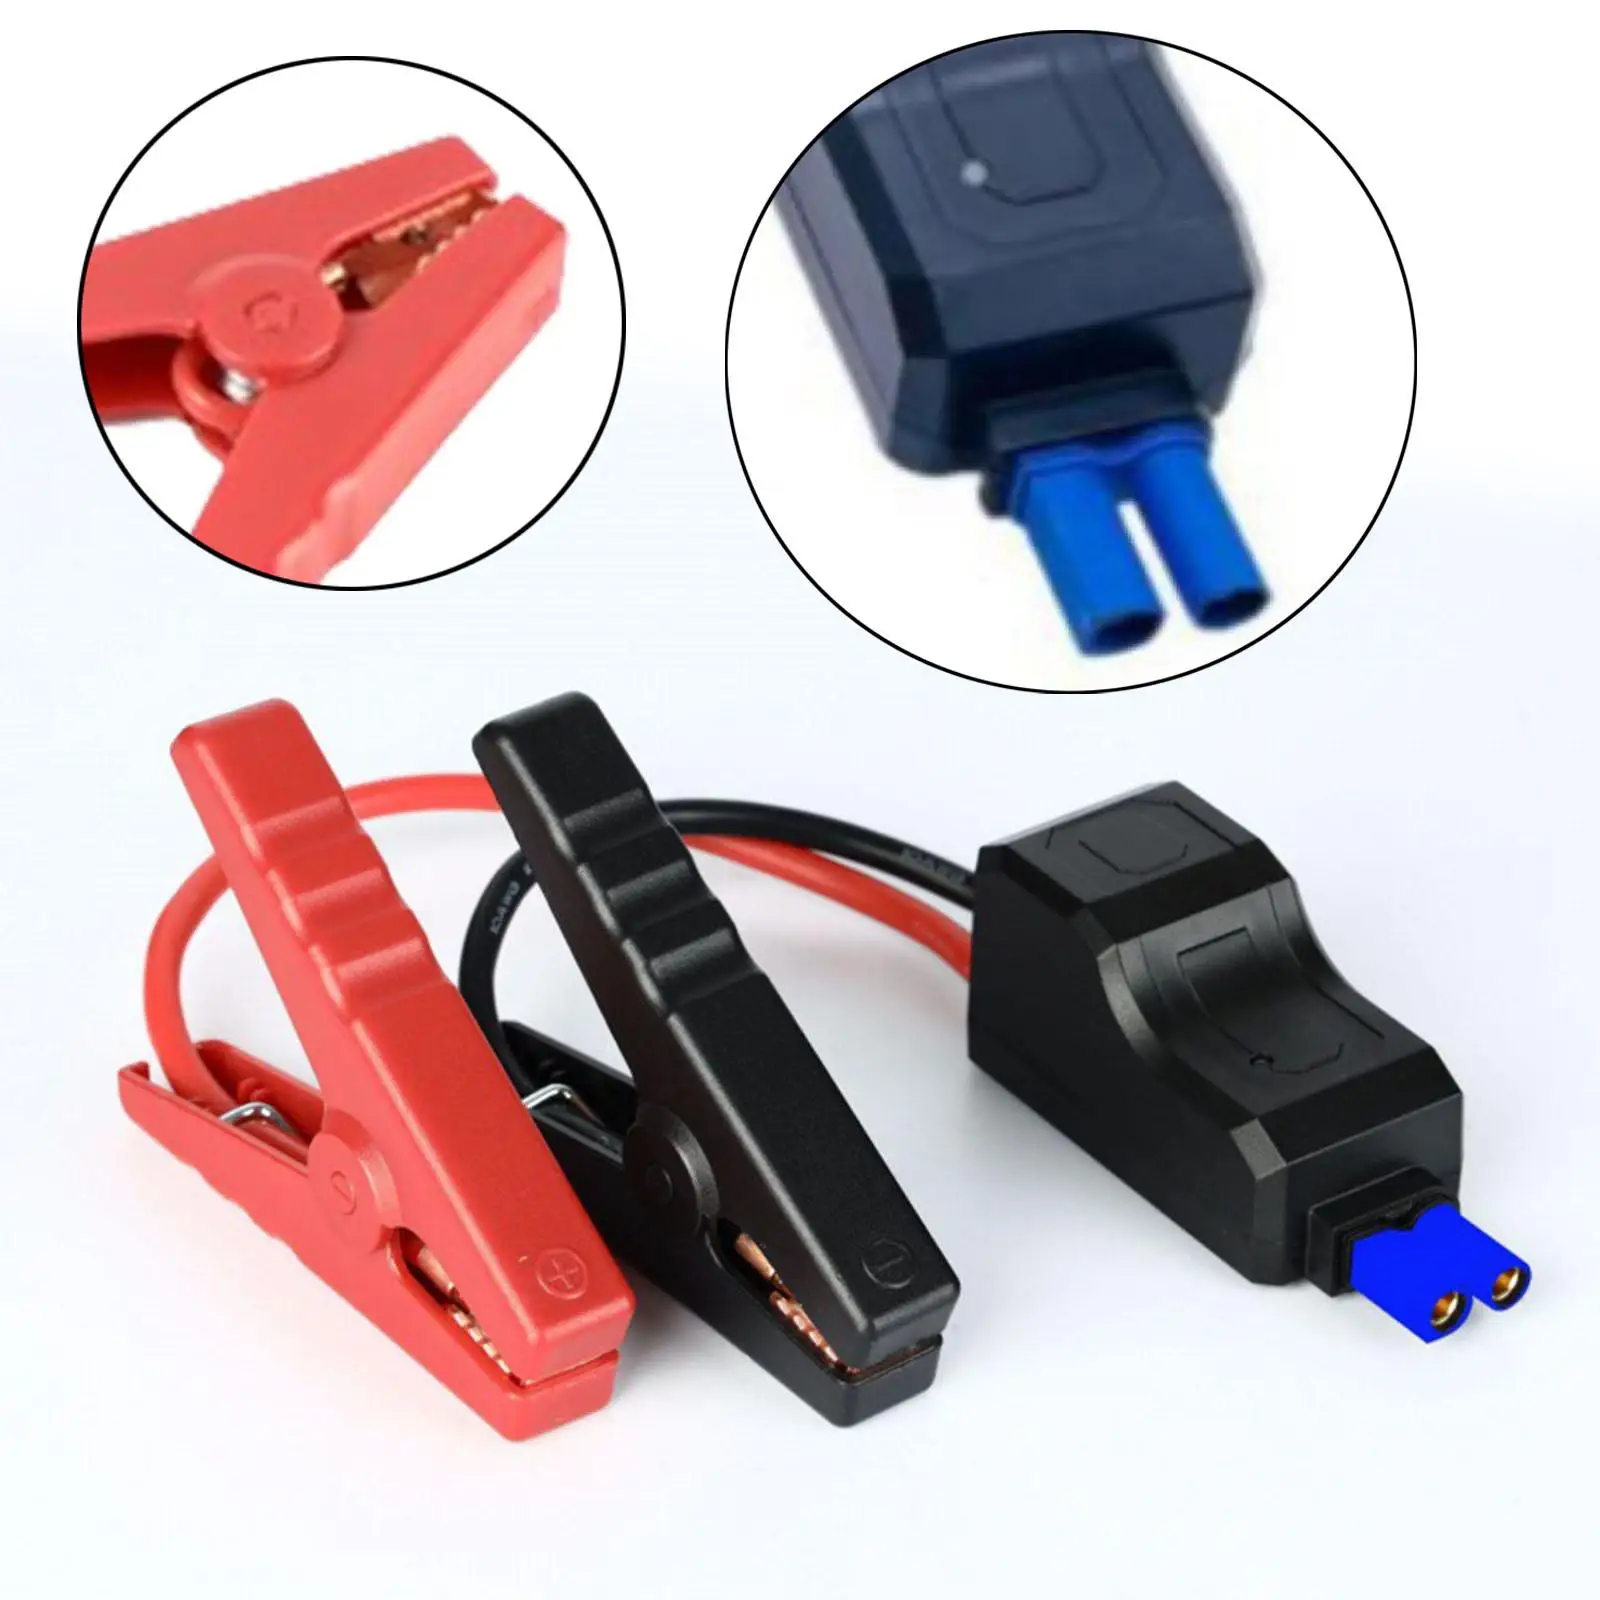 Generic Jump Starter Cable Clamp Easy to Use Portable Alligator Clip Booster